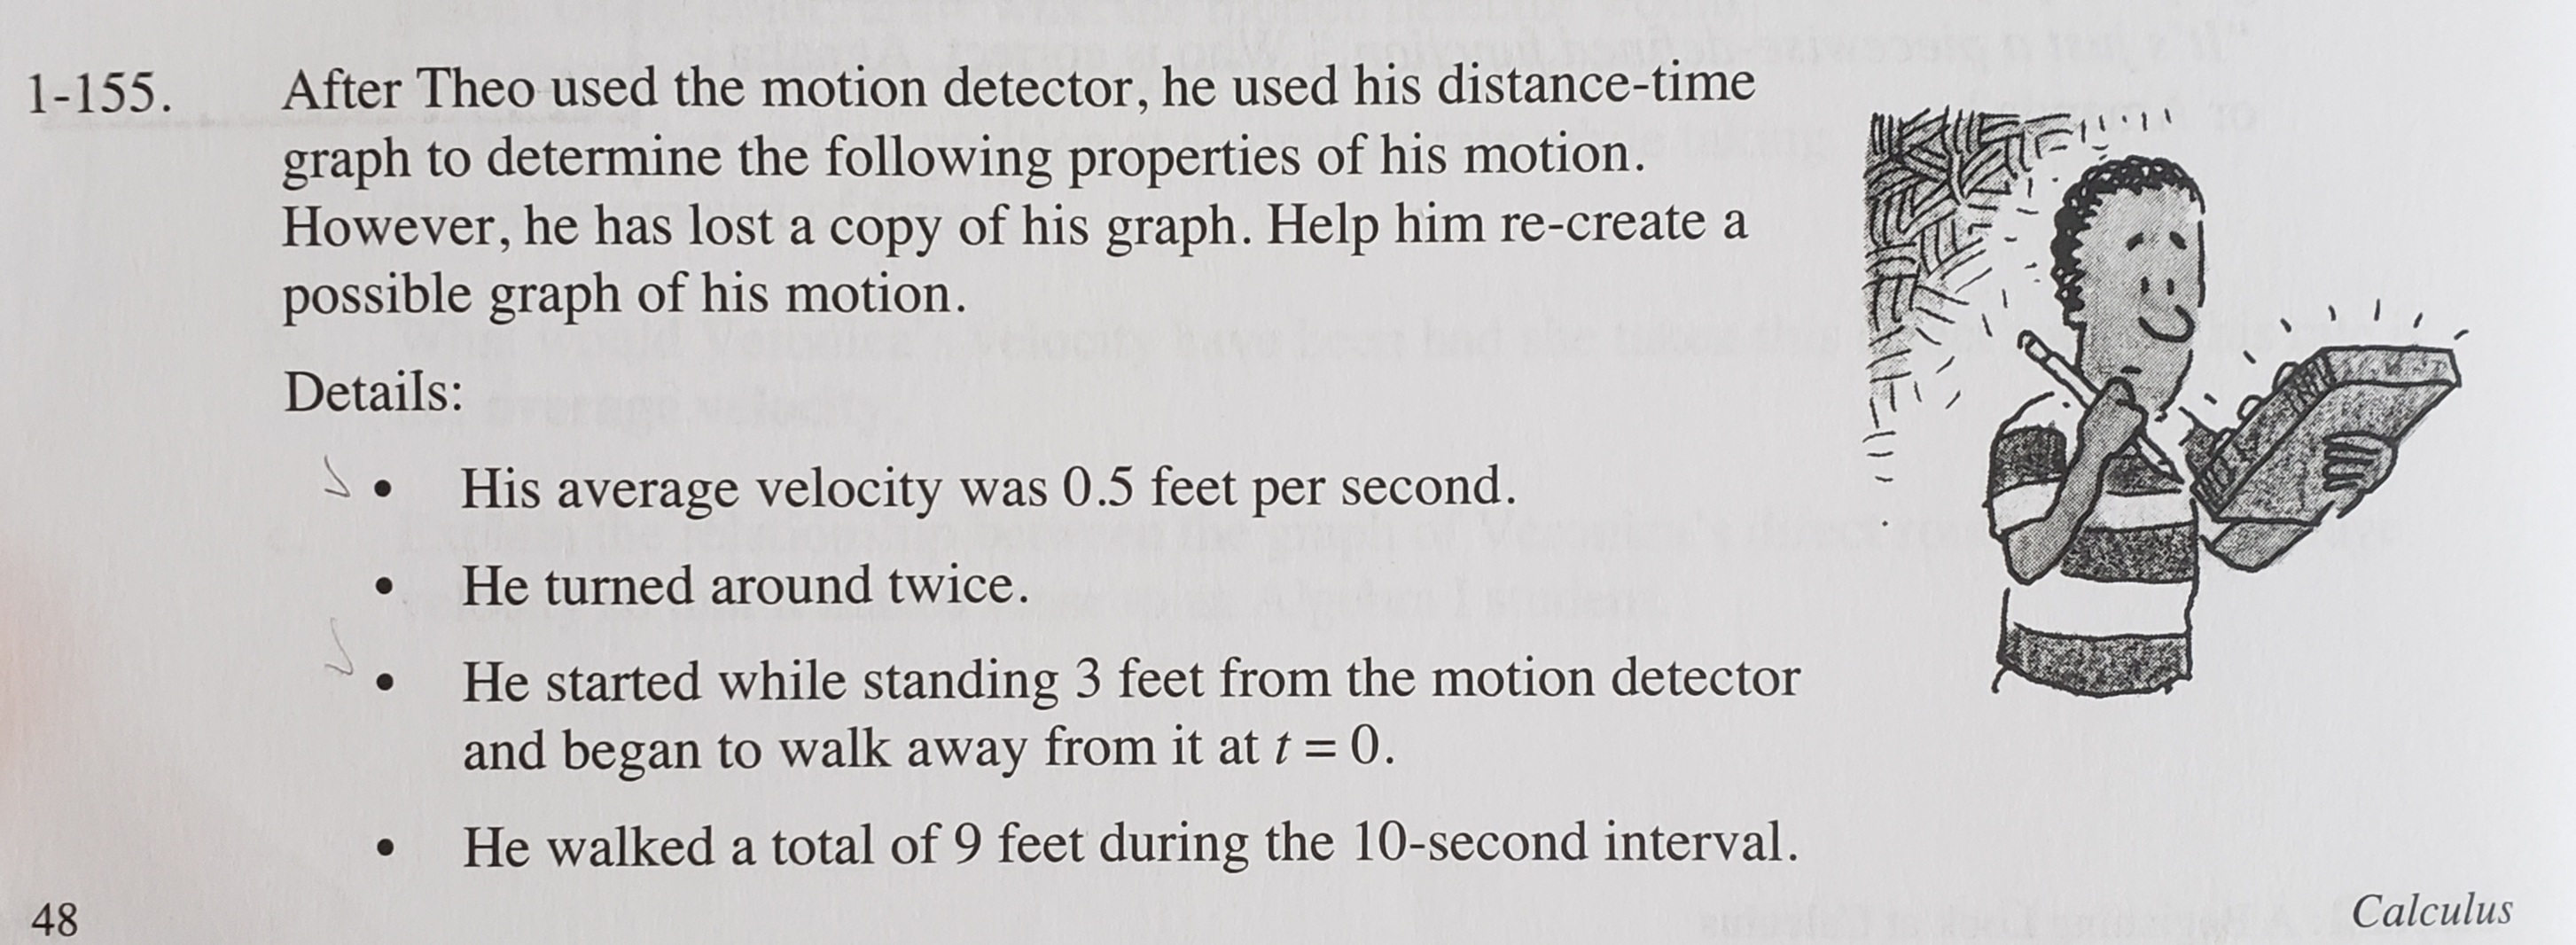 After Theo used the motion detector, he used his distance-time
graph to determine the following properties of his motion.
However, he has lost a copy of his graph. Help him re-create a
possible graph of his motion.
1-155.
Details:
S. His average velocity was 0.5 feet per second.
He turned around twice.
He started while standing 3 feet from the motion detector
and began to walk away from it at t = 0.
